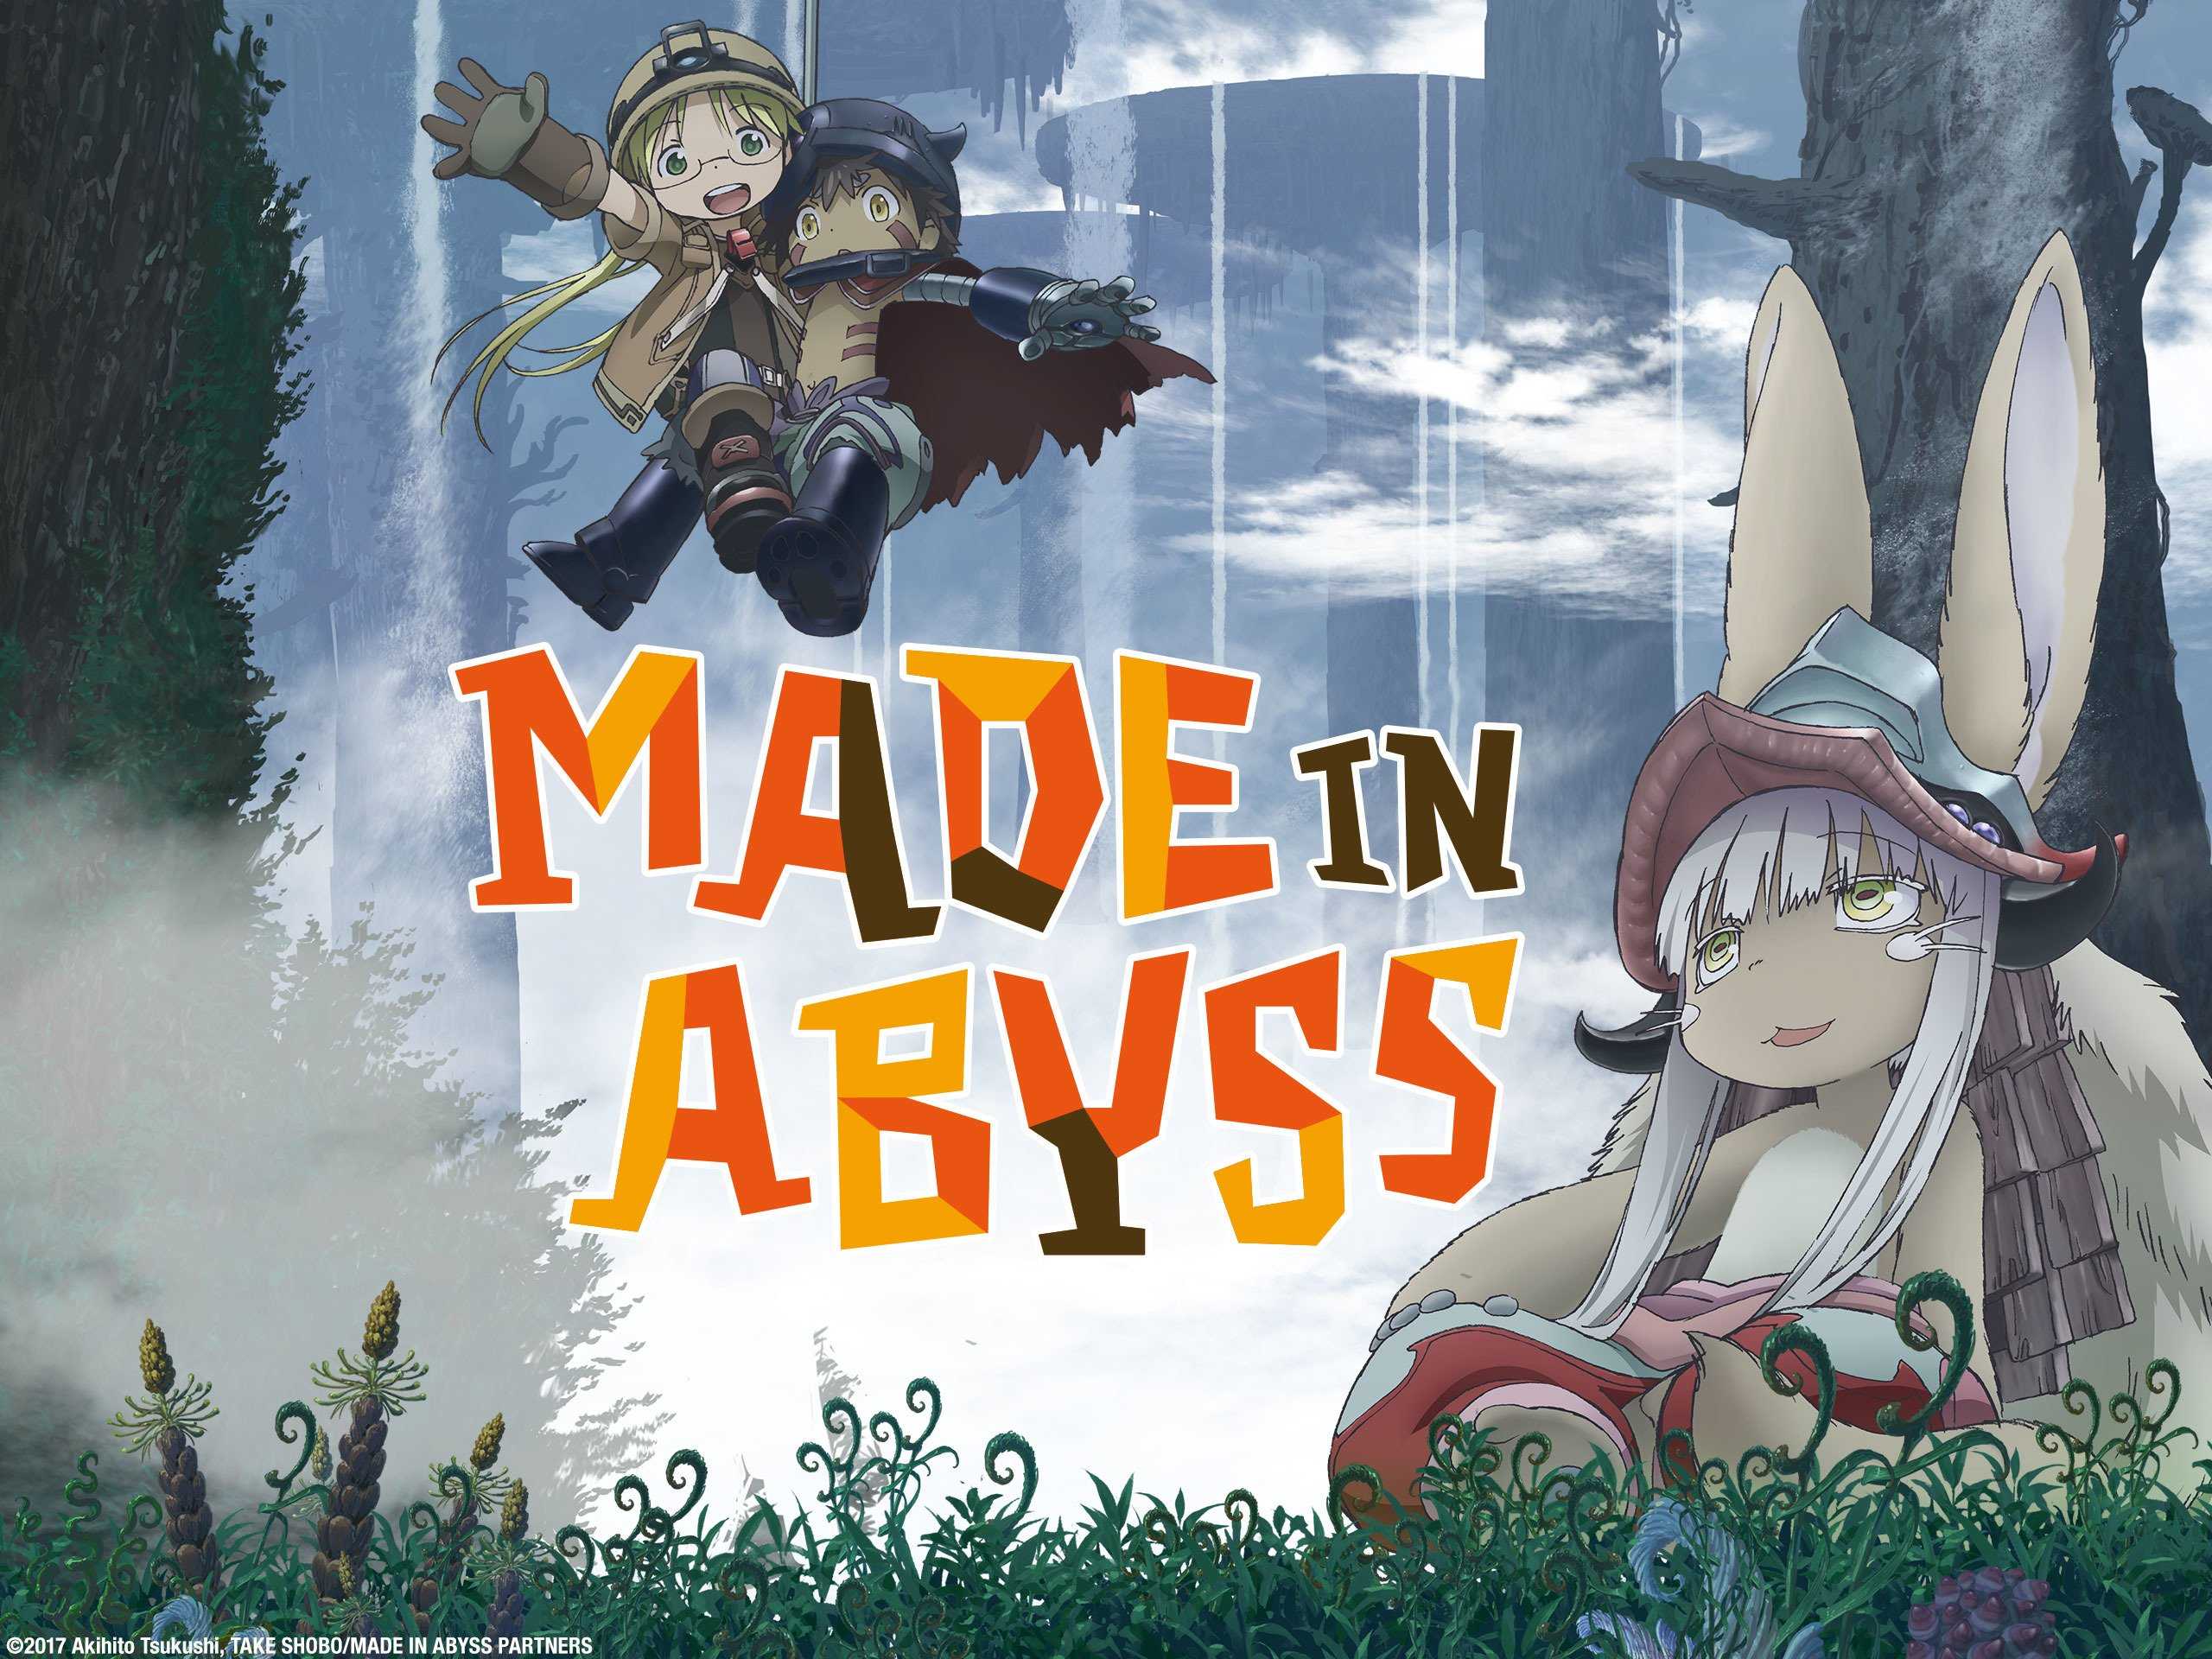 Review Anime Summer Made In Abyss Kompasianacom